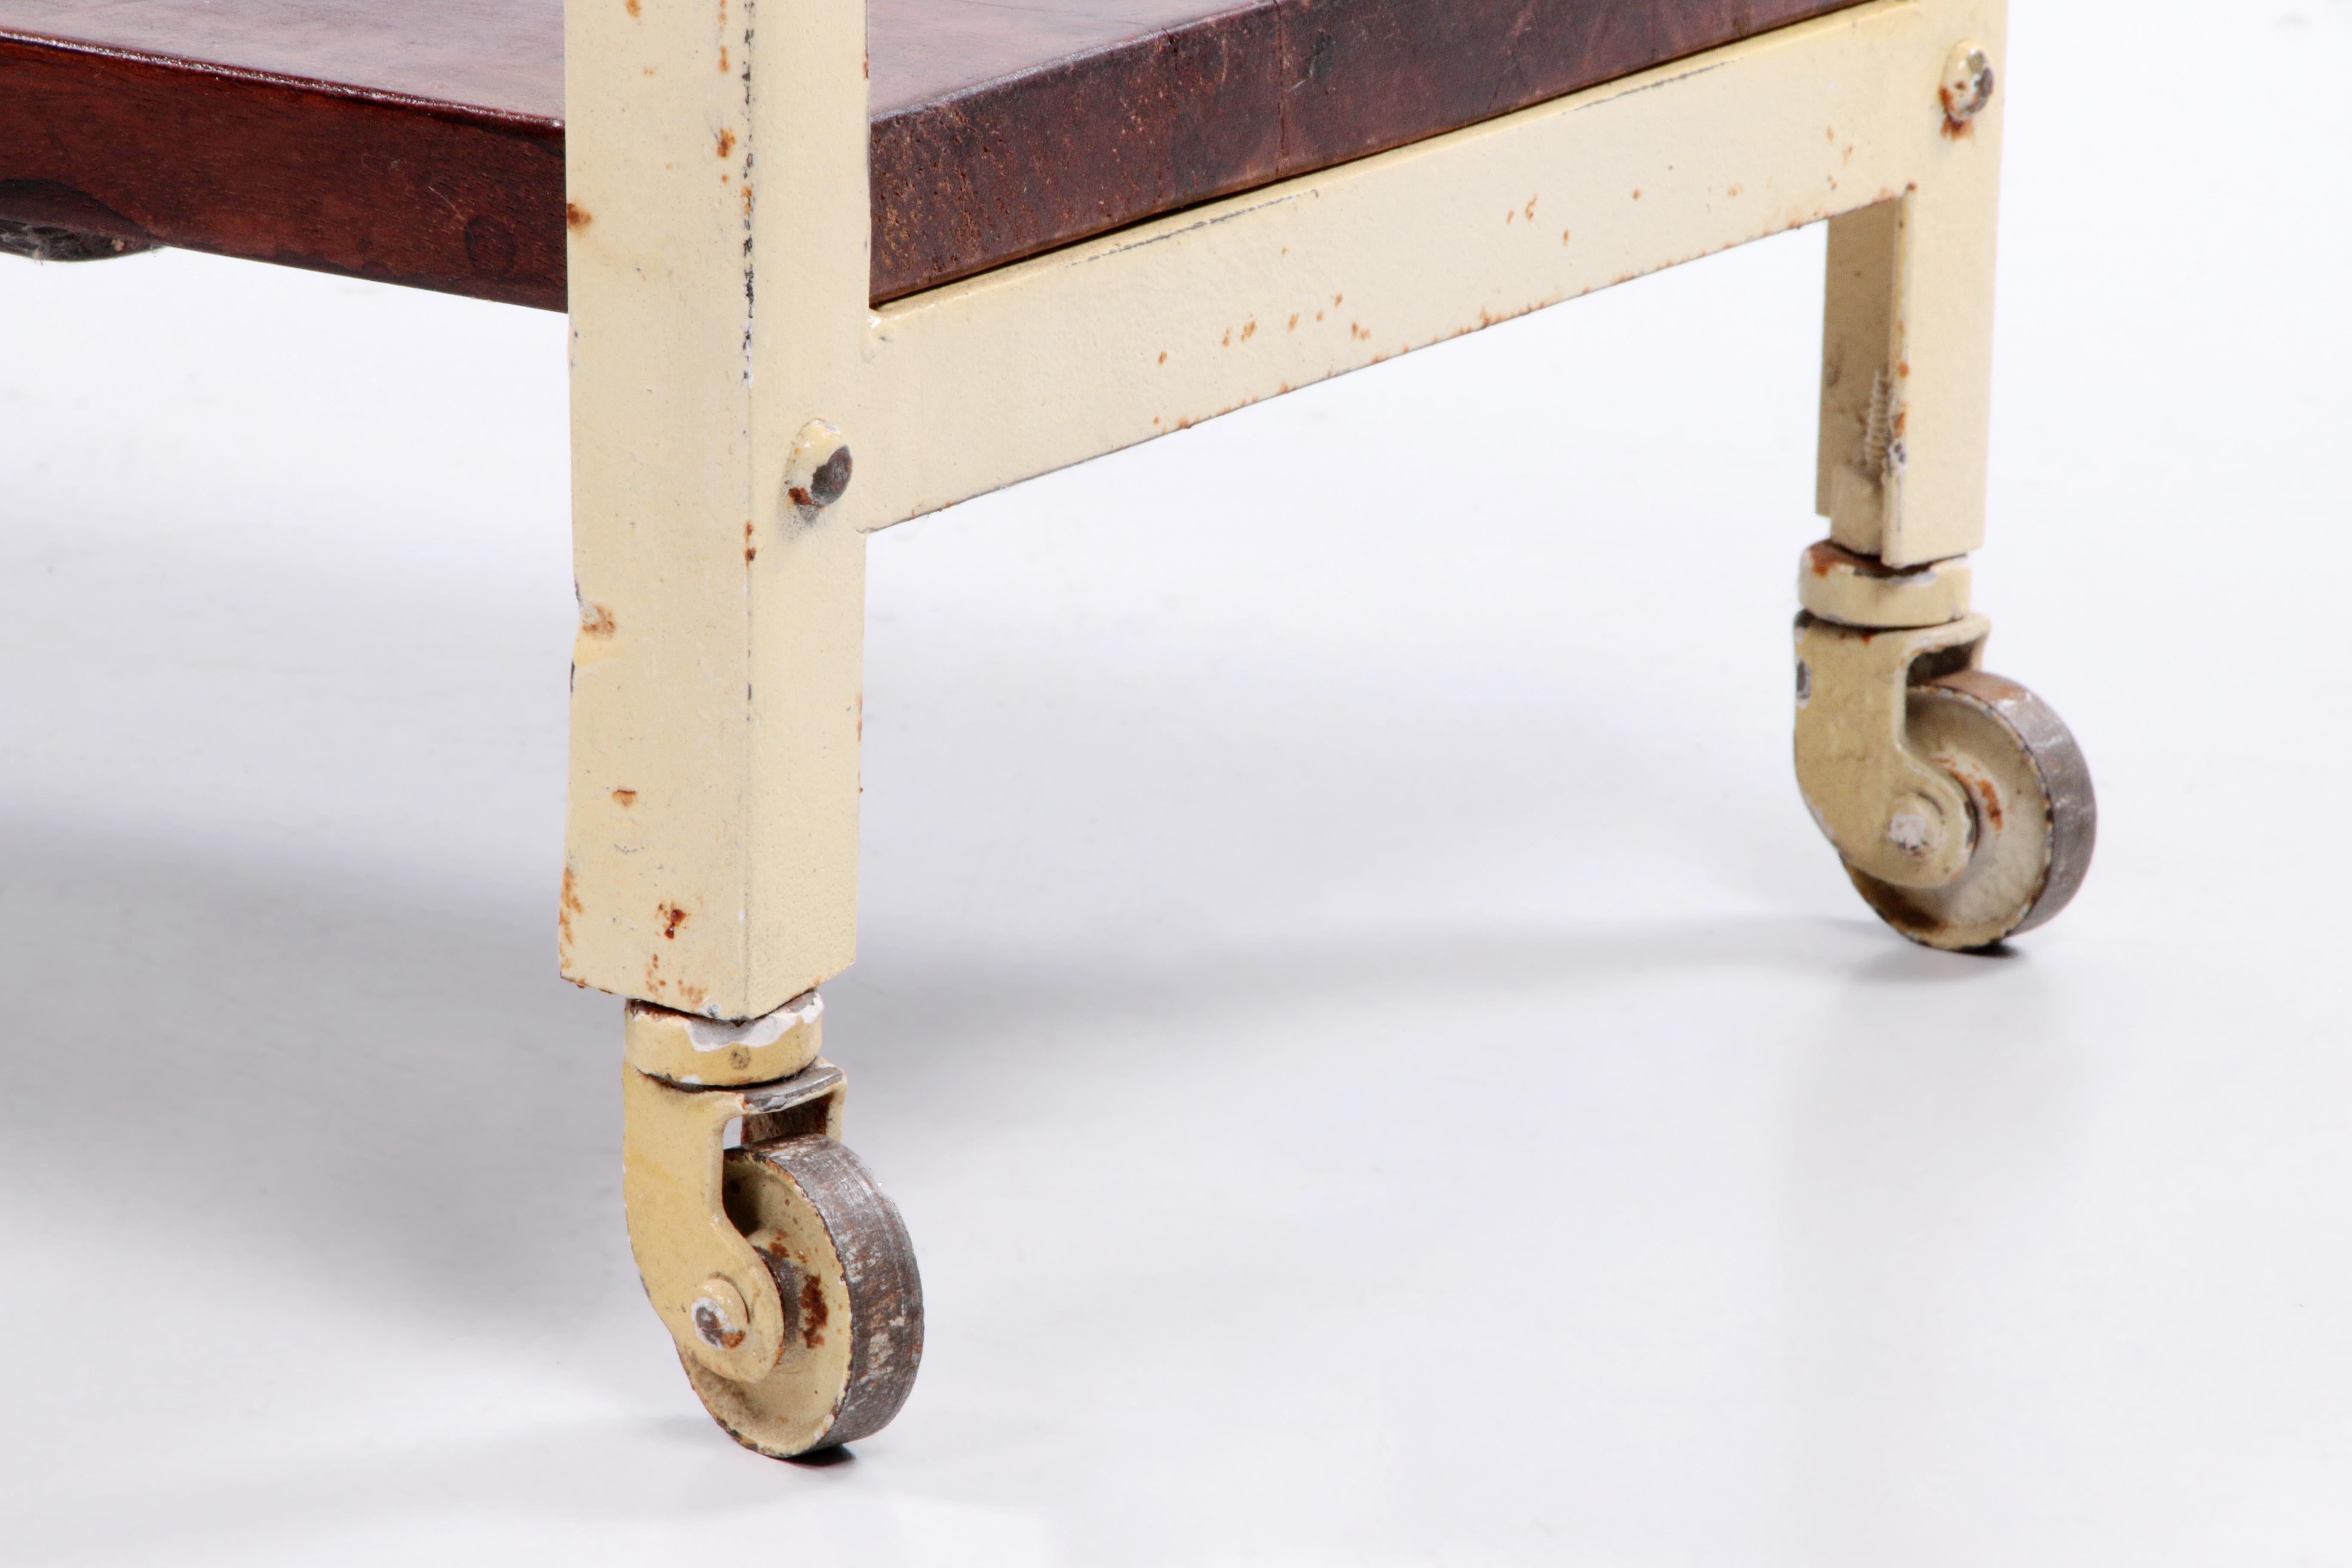 20th Century Industrial Robust Side Table Made of Wood and Metal, 1970 England For Sale